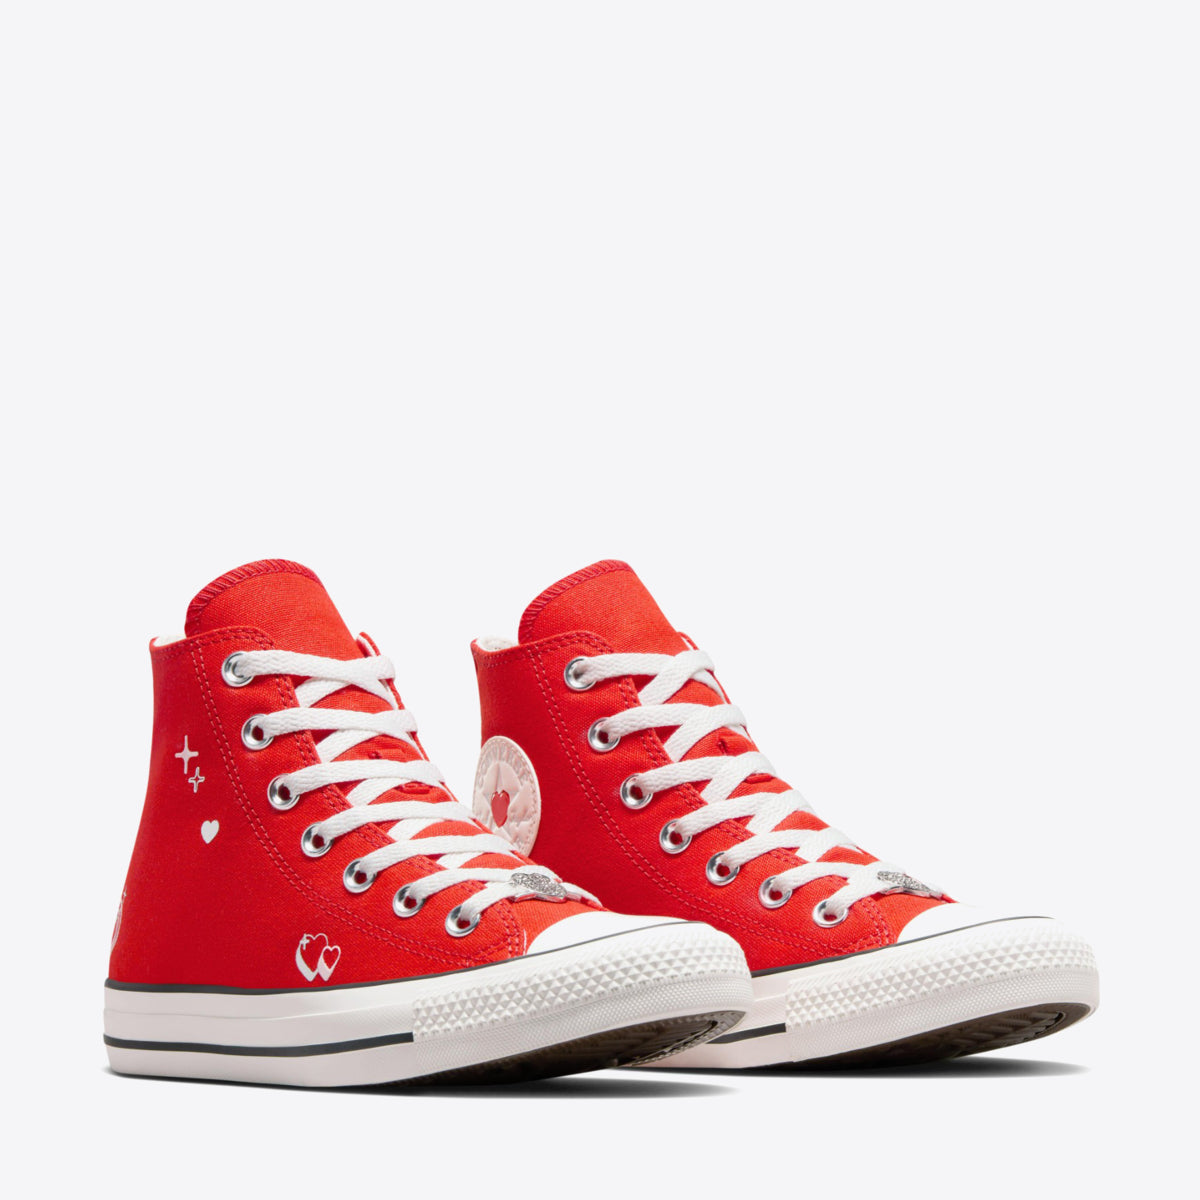 CONVERSE Chuck Taylor All Star BEMY2K High Fever Dream/Vintage White - Image 6